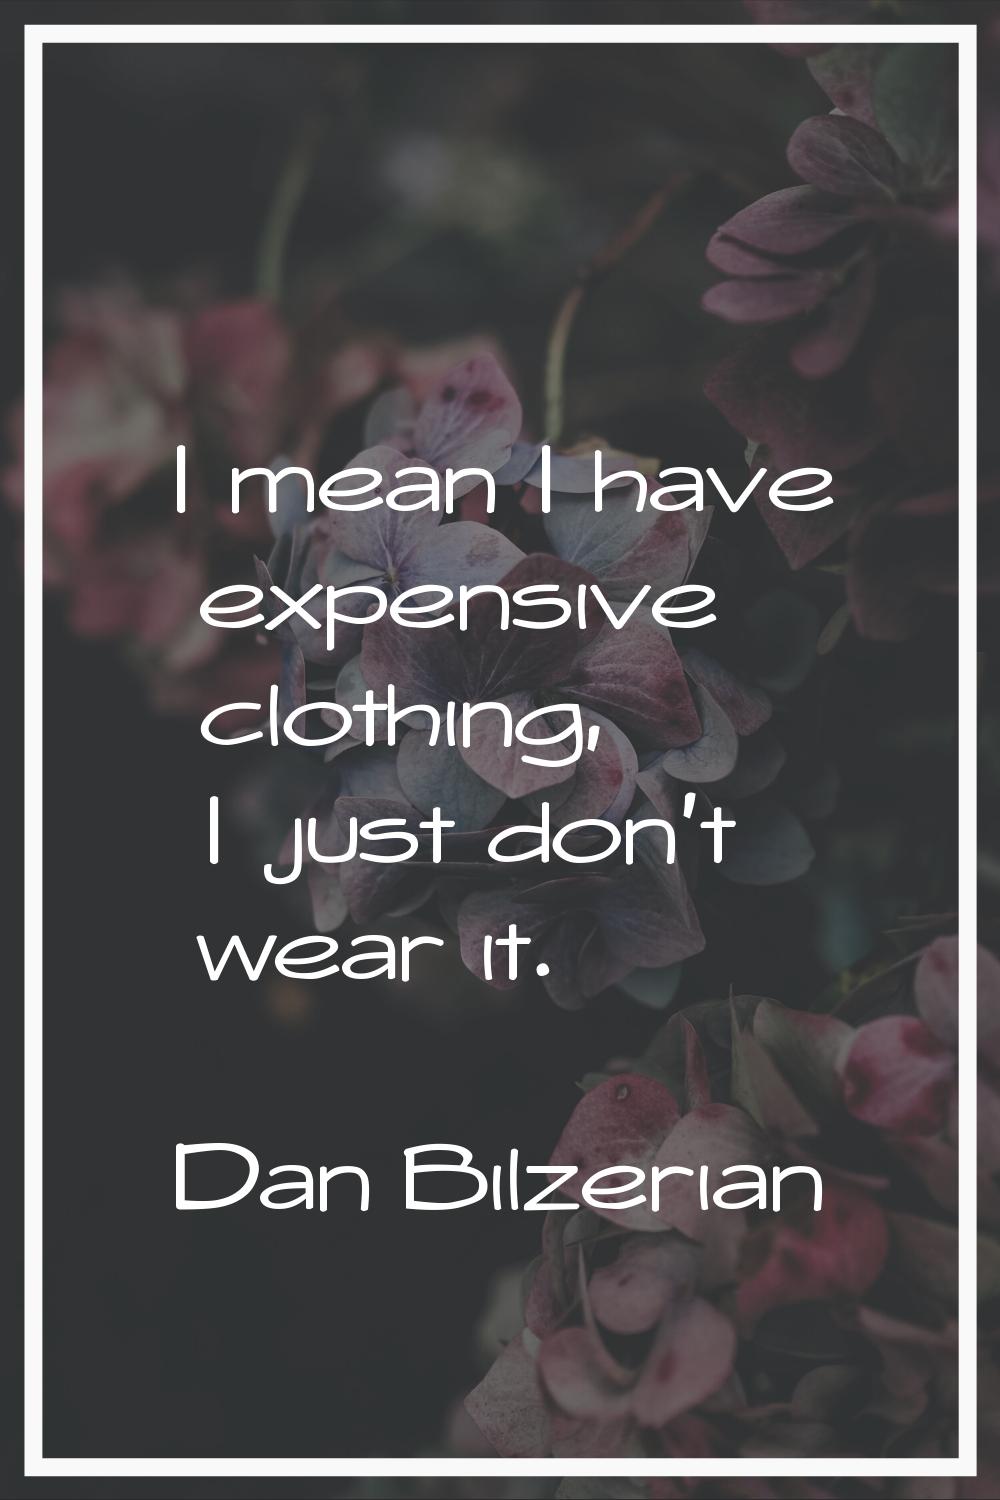 I mean I have expensive clothing, I just don't wear it.